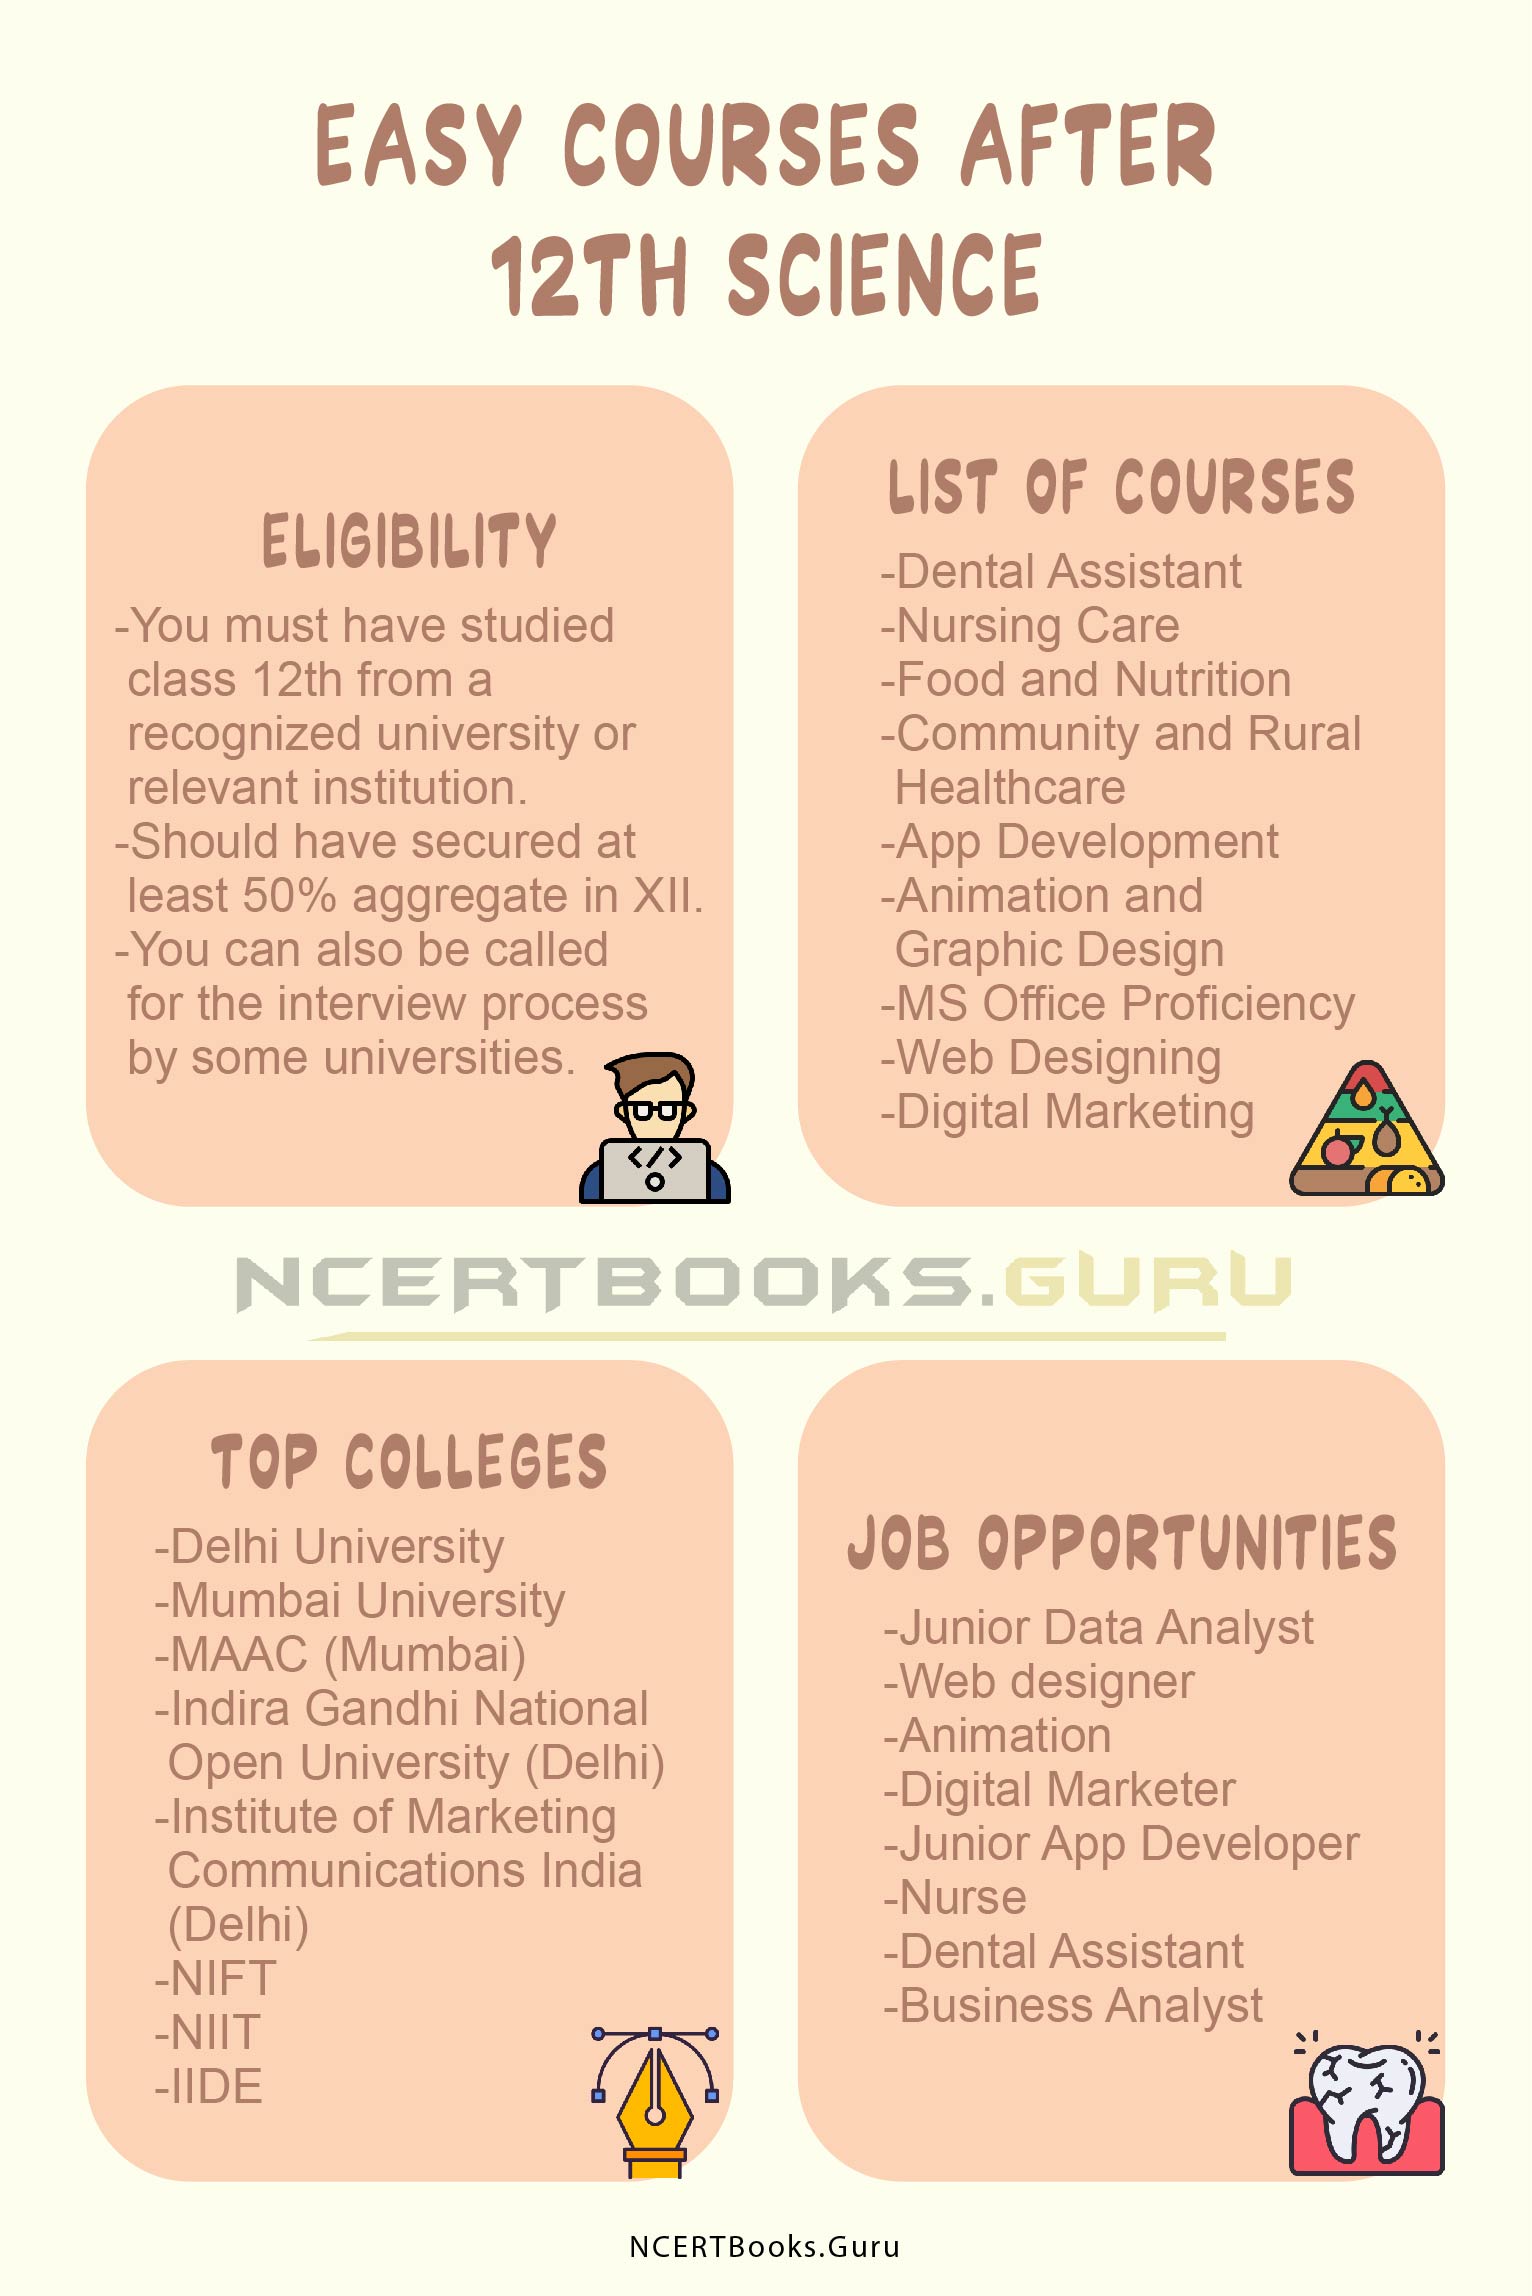 Easy Courses after 12th Science - Eligibility, Fees, Duration, Colleges